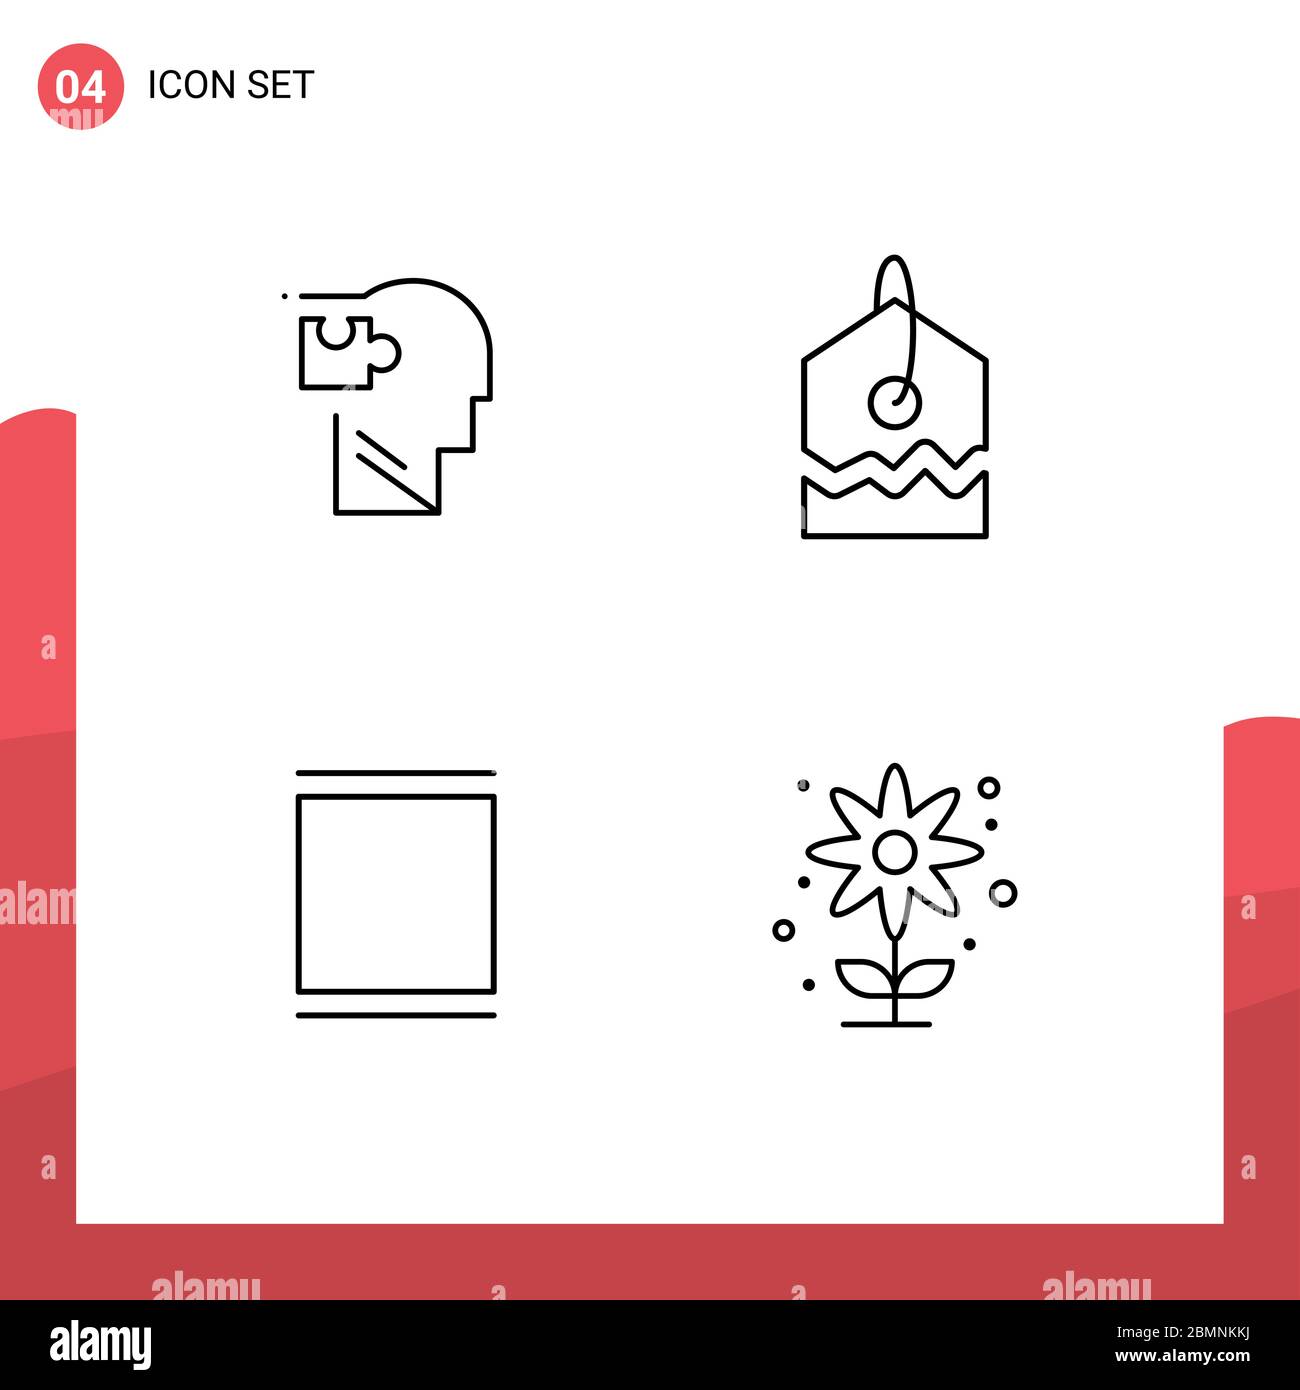 Mobile Interface Line Set of 4 Pictograms of human, instagram, puzzle, over, timeline Editable Vector Design Elements Stock Vector